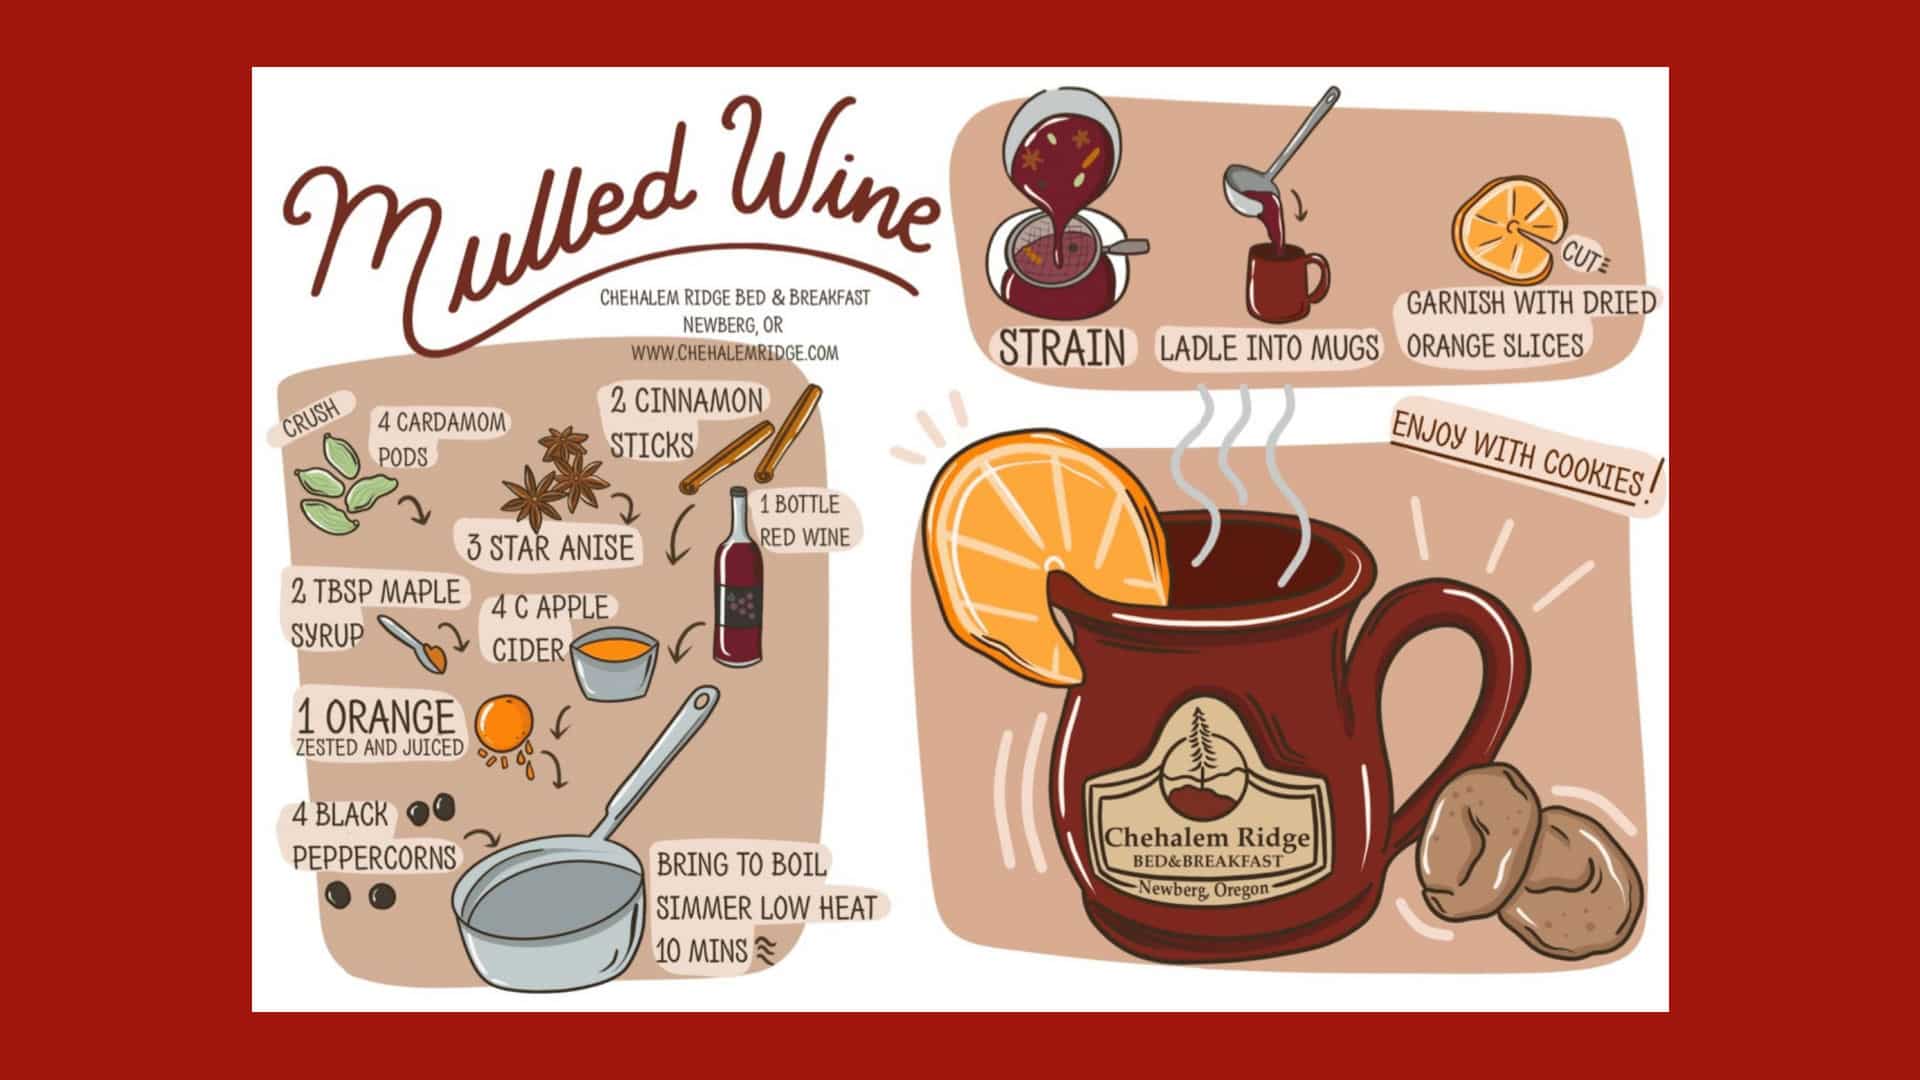 Mulled Wine recipe card from Chehalem Ridge Bed and Breakfast